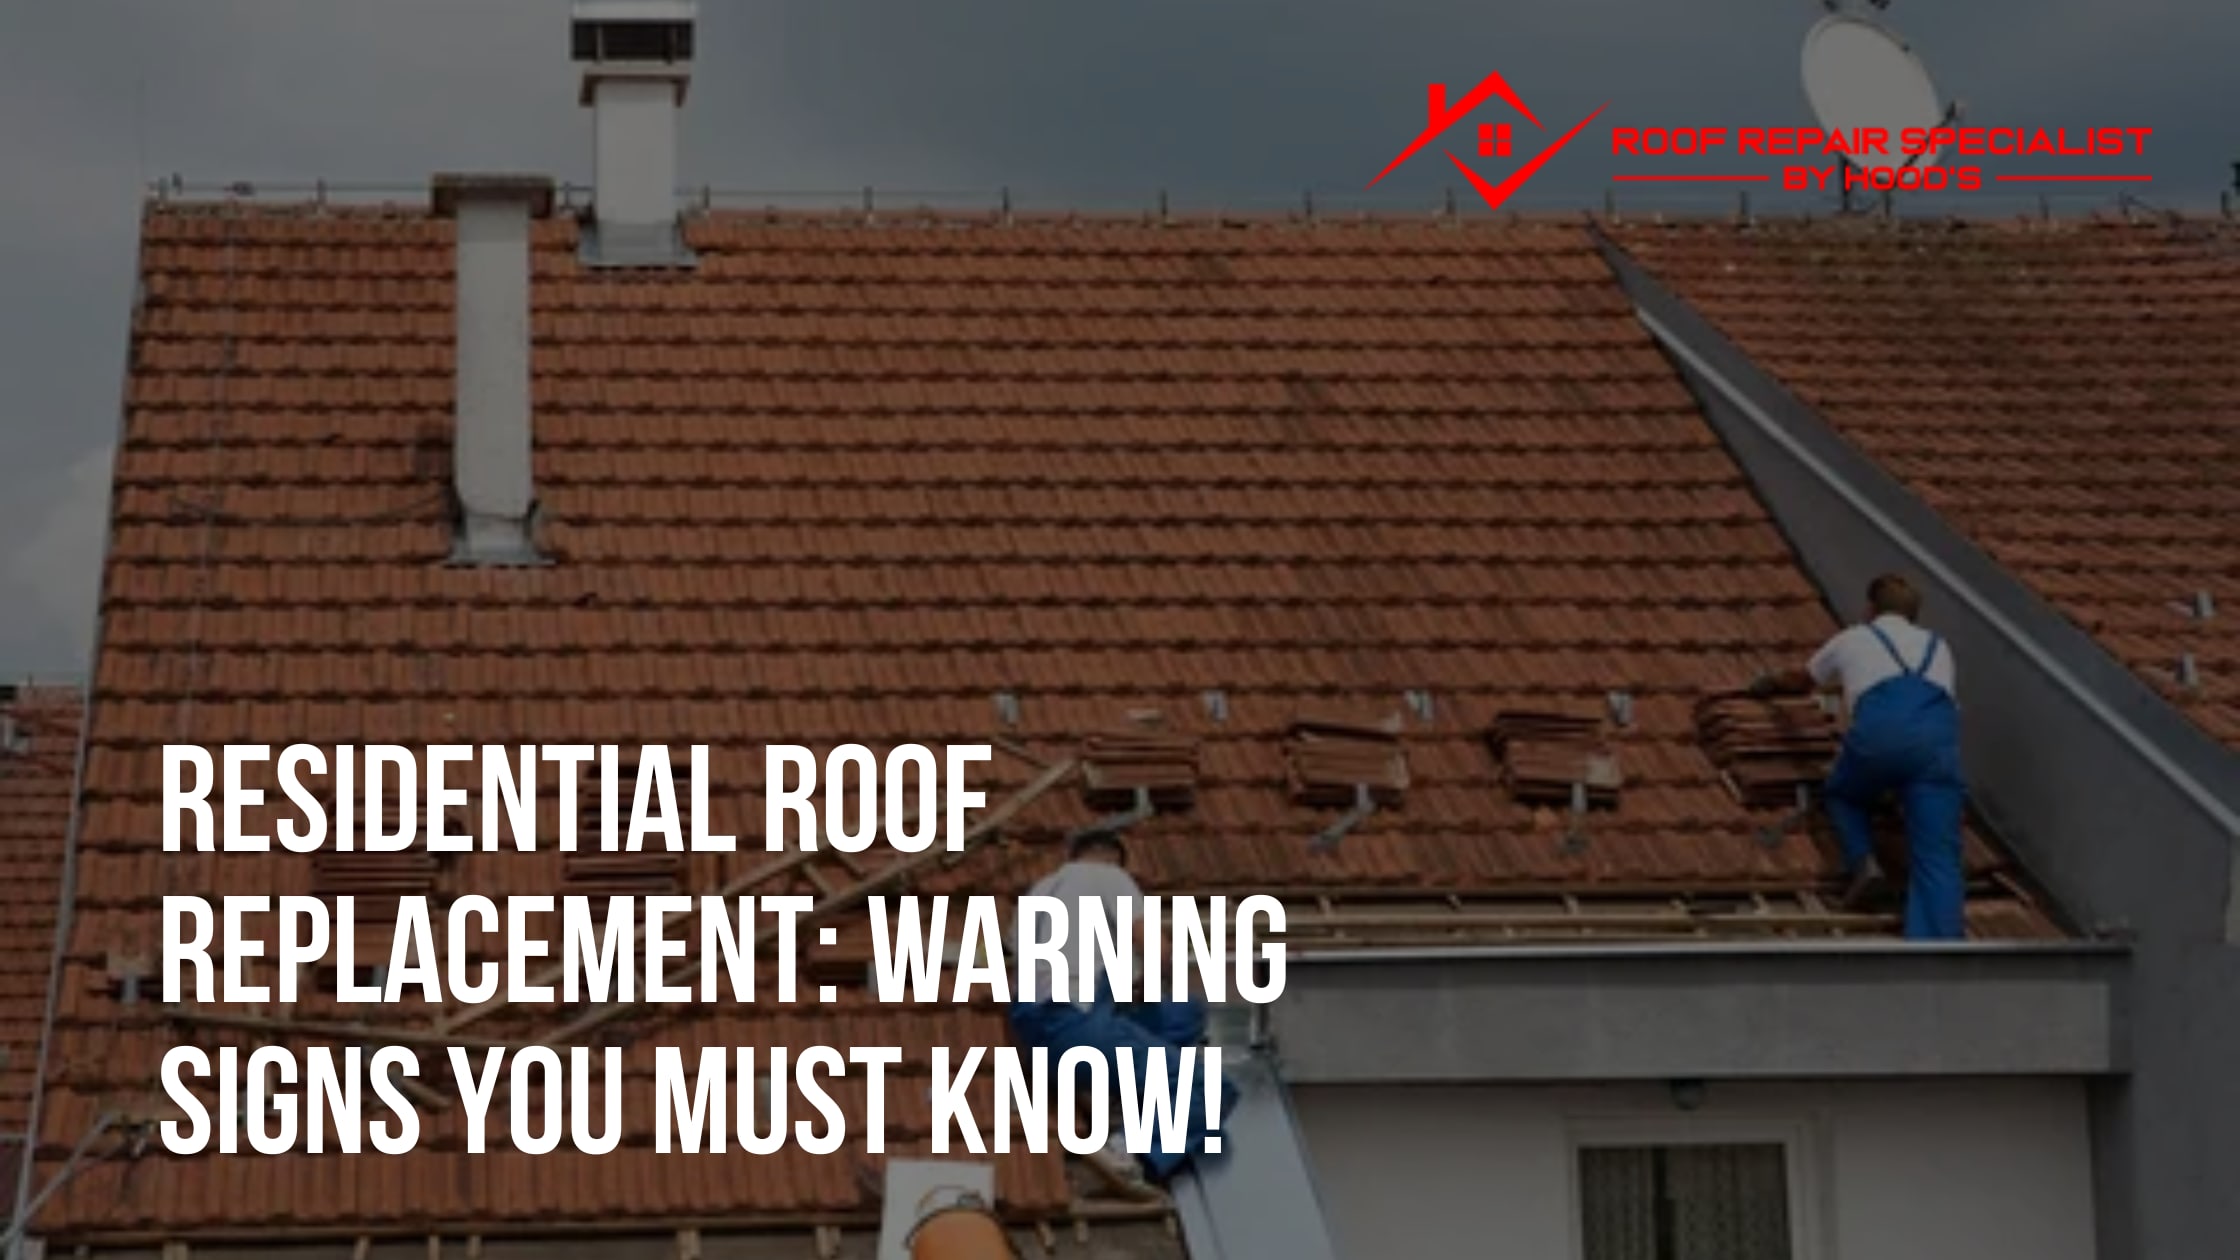 Residential Roof Replacement: Warning Signs You Must Know! | Lifehack